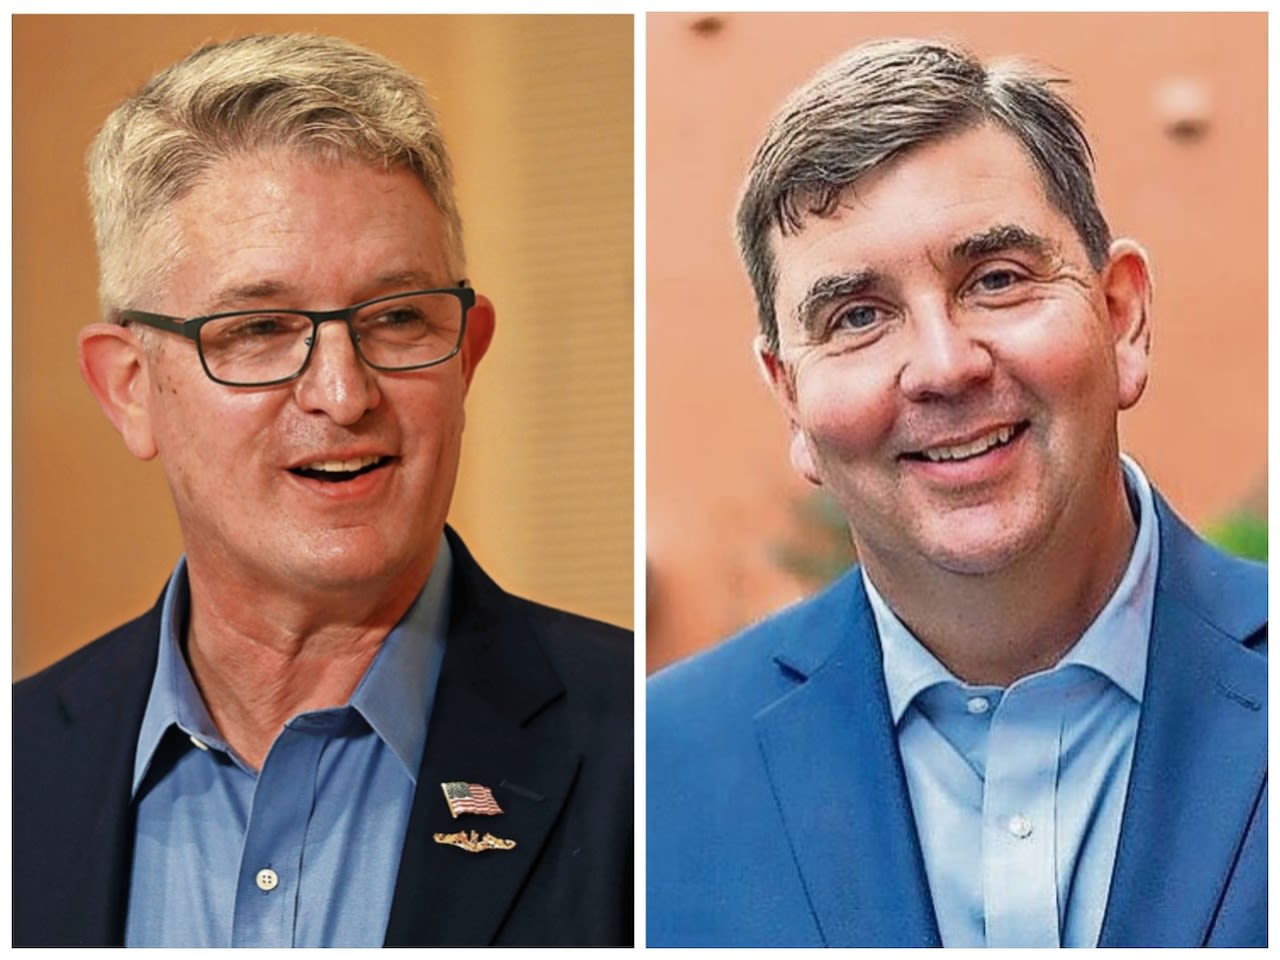 Got questions for Rep. Brandon Williams or John Mannion? We’ll ask them in live Q&A